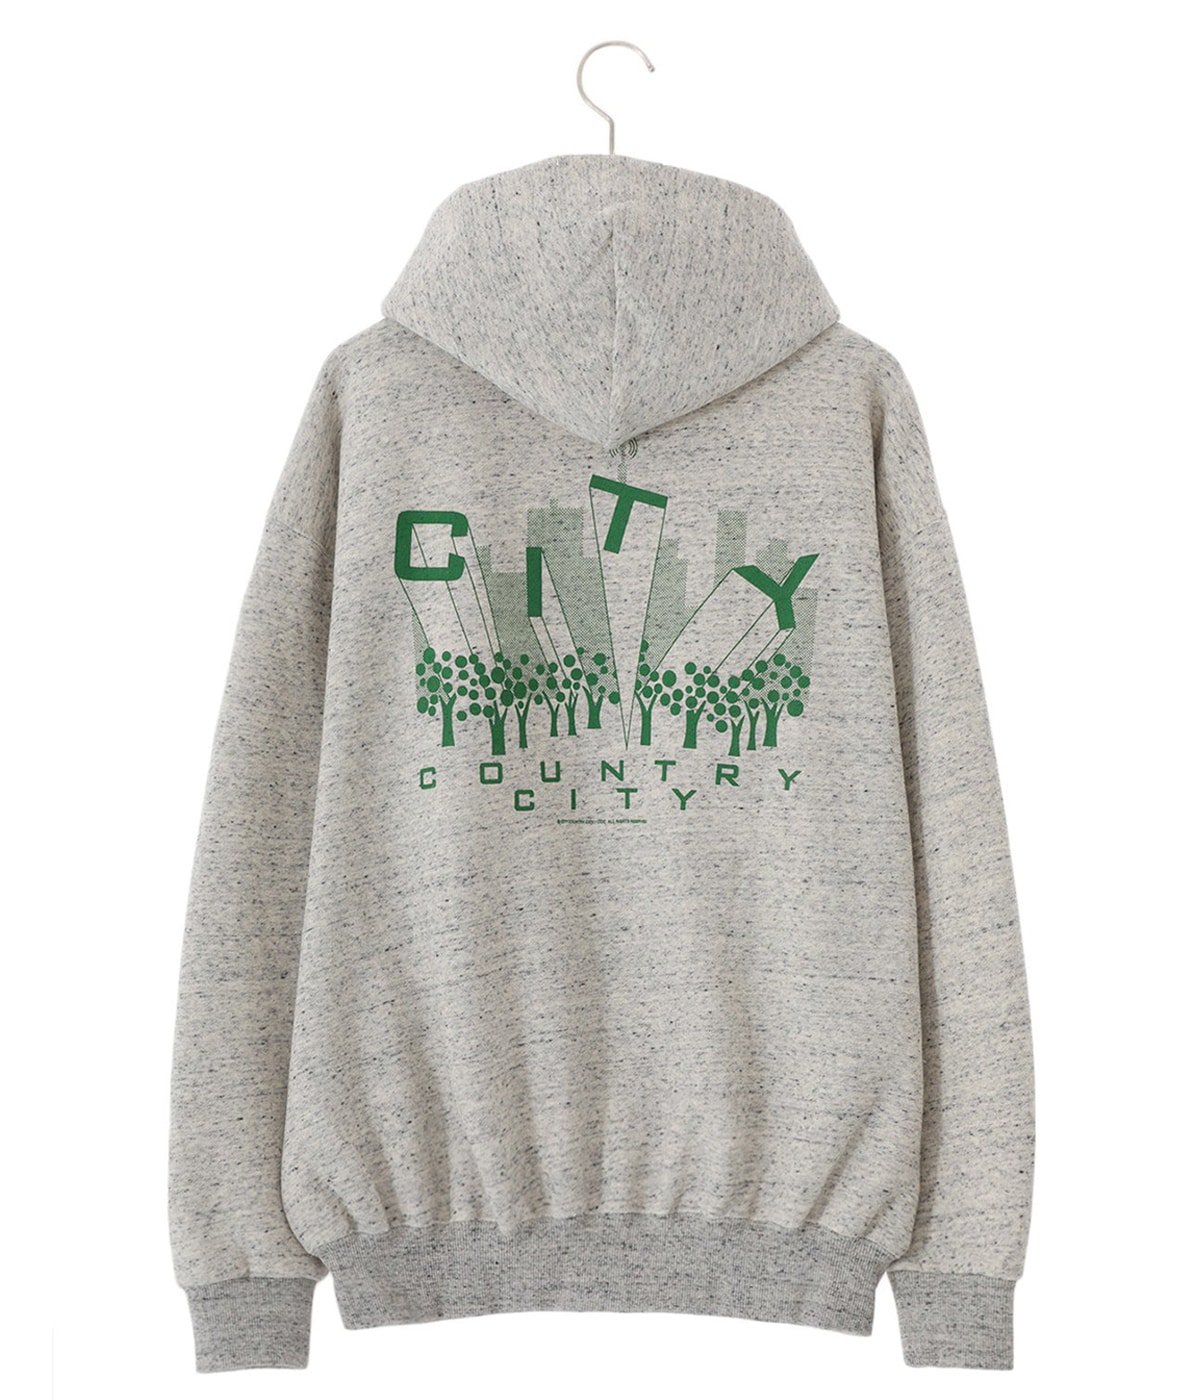 EMBROIDERED LOGO ZIP UP HOODIE | CITY COUNTRY CITY(シティー 